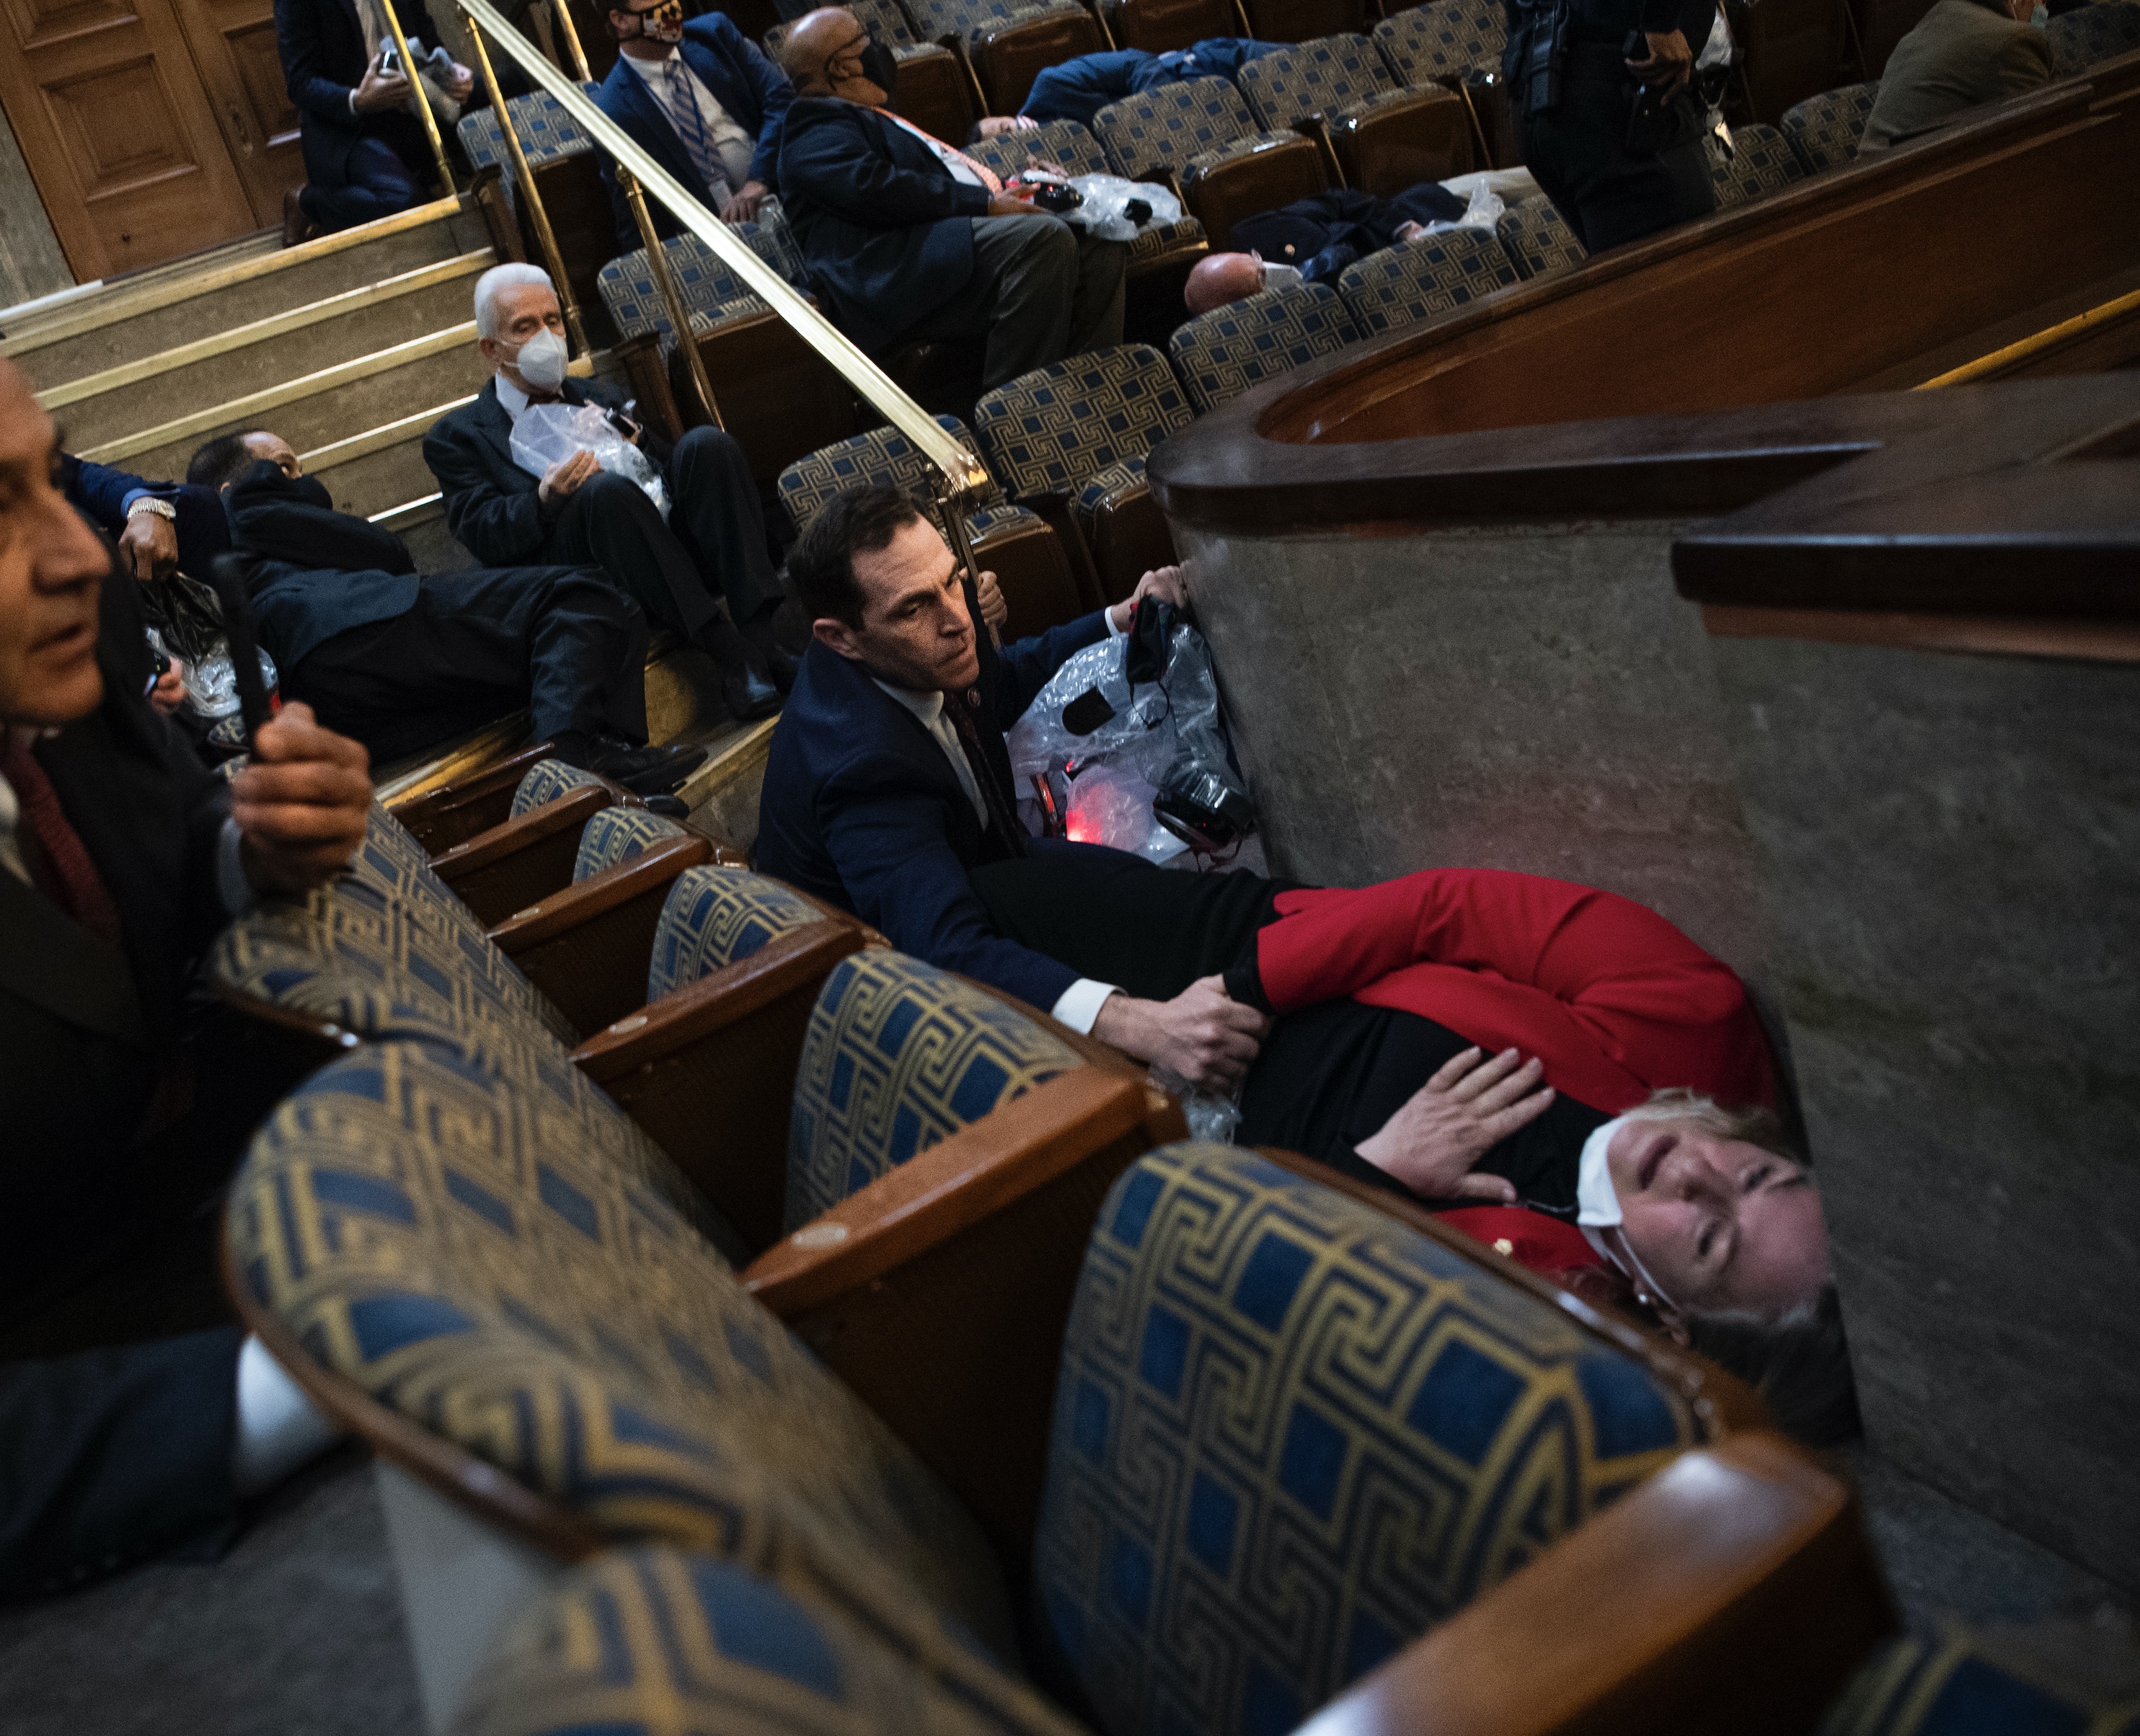 Rep. Jason Crow comforts Rep. Susan Wild while taking cover as protesters disrupt the joint session of Congress to certify the Electoral College vote on Jan. 6, 2021.